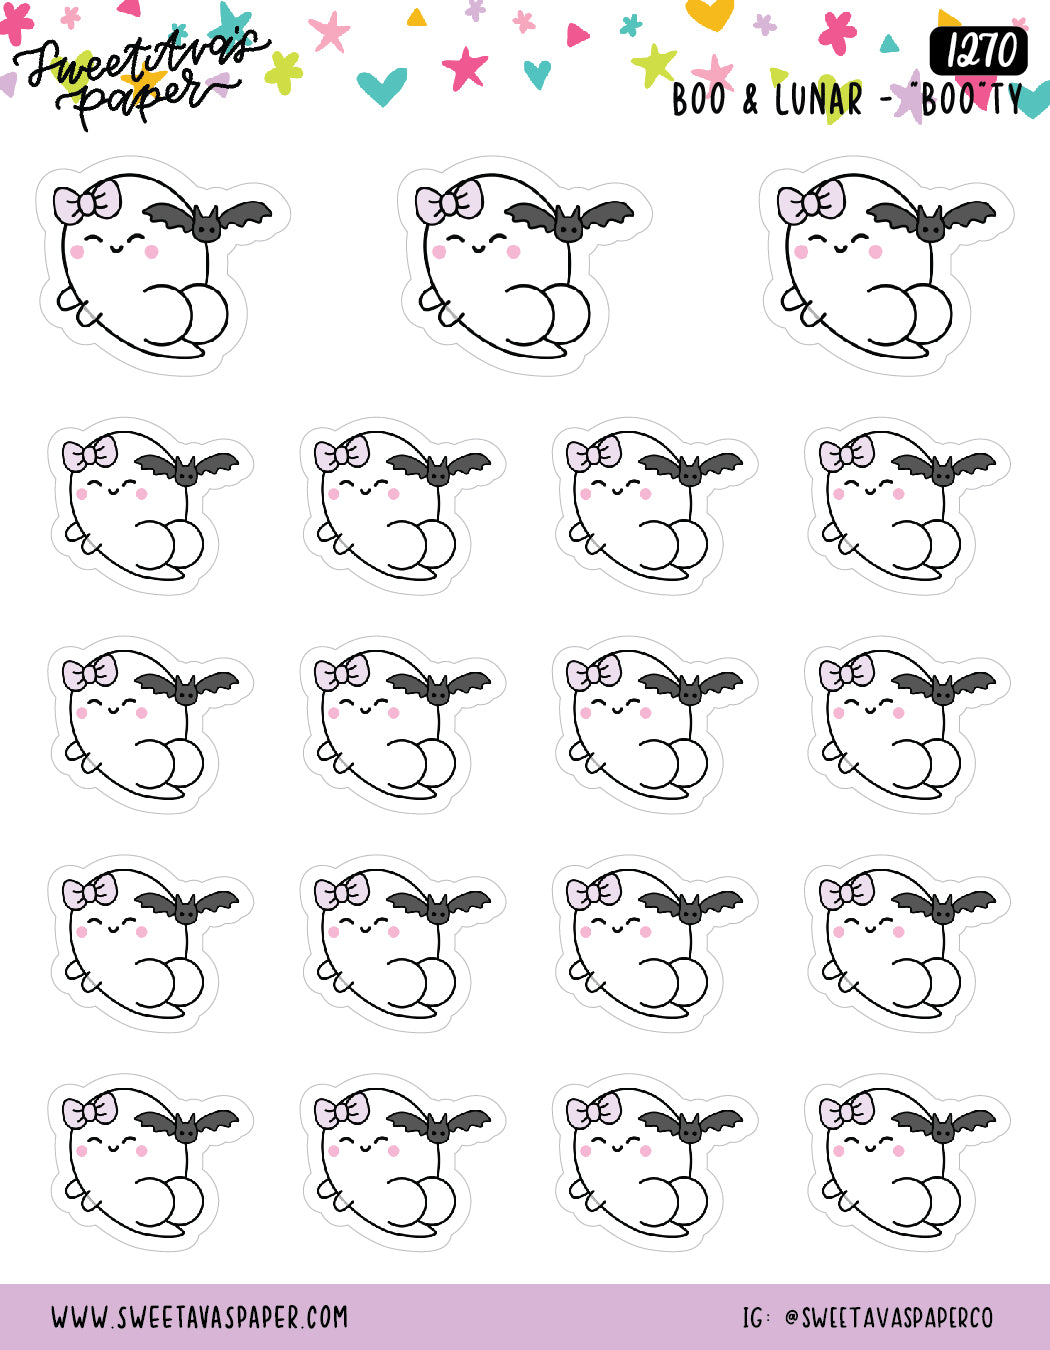 Booty Butt Planner Stickers - Boo and Lunar [1270]